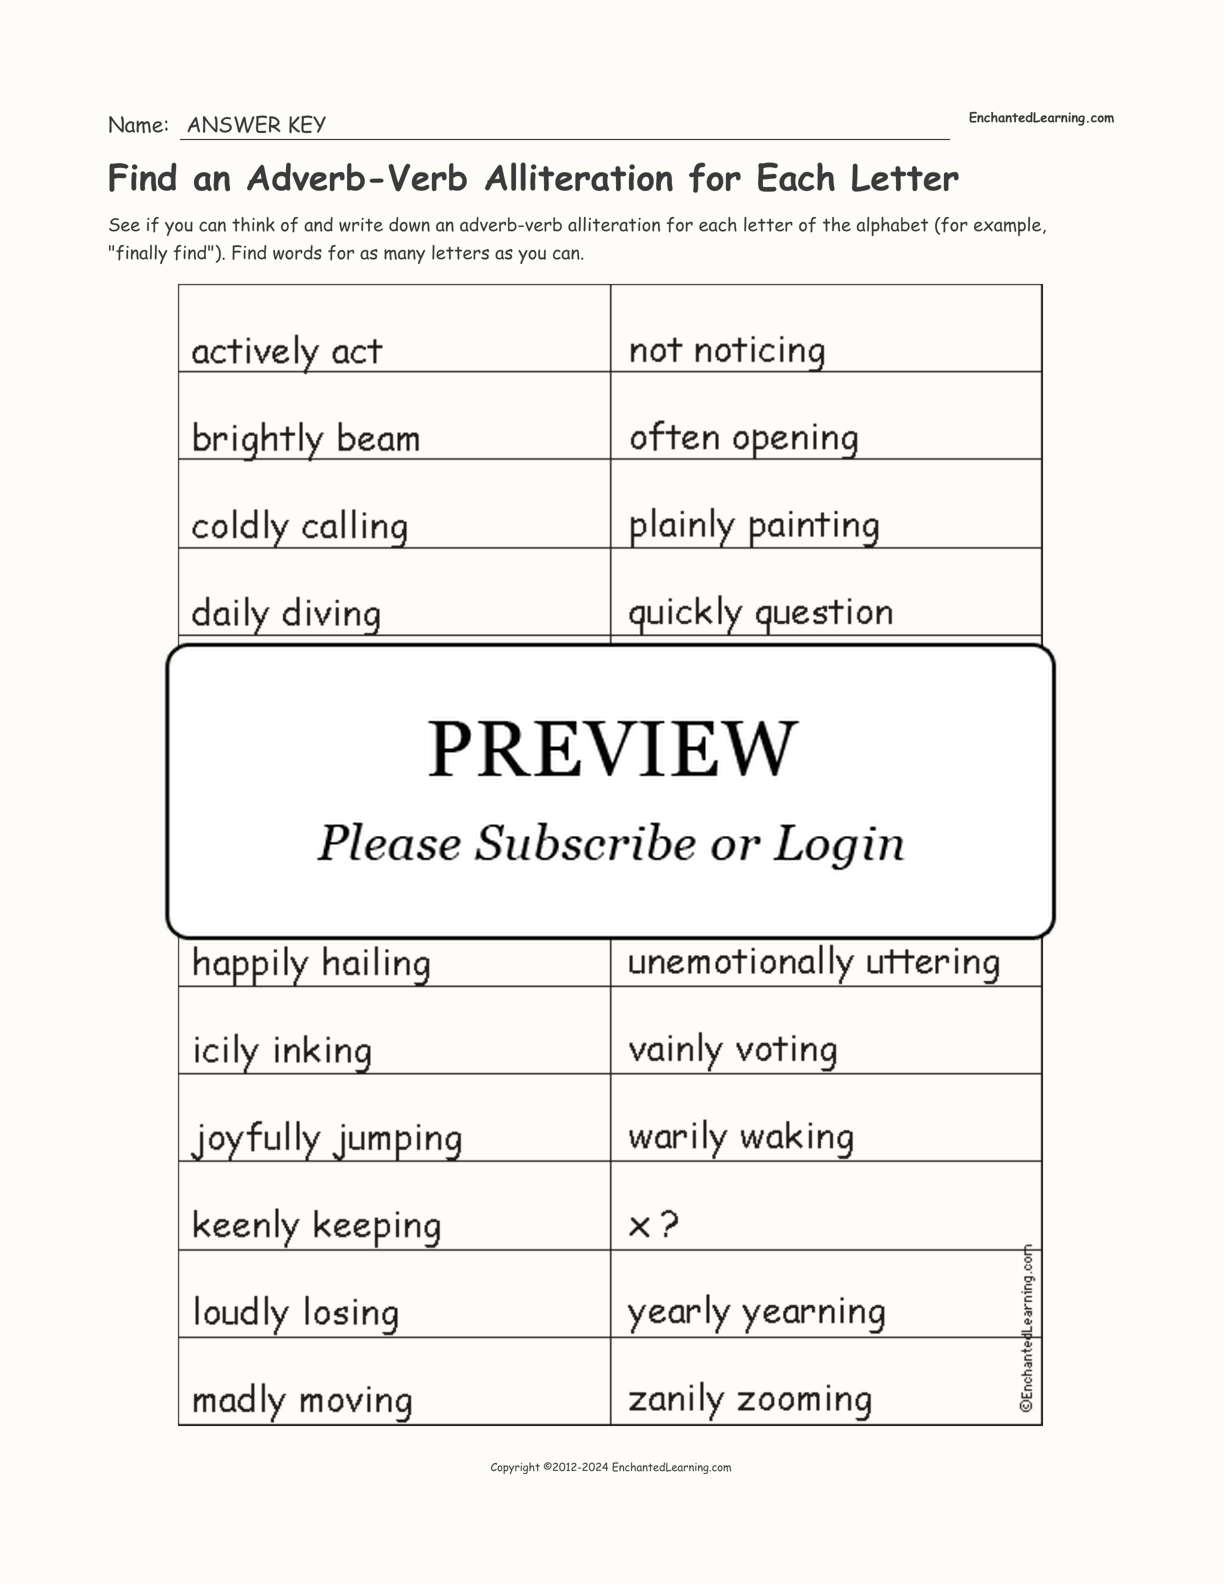 Find an Adverb-Verb Alliteration for Each Letter interactive worksheet page 2